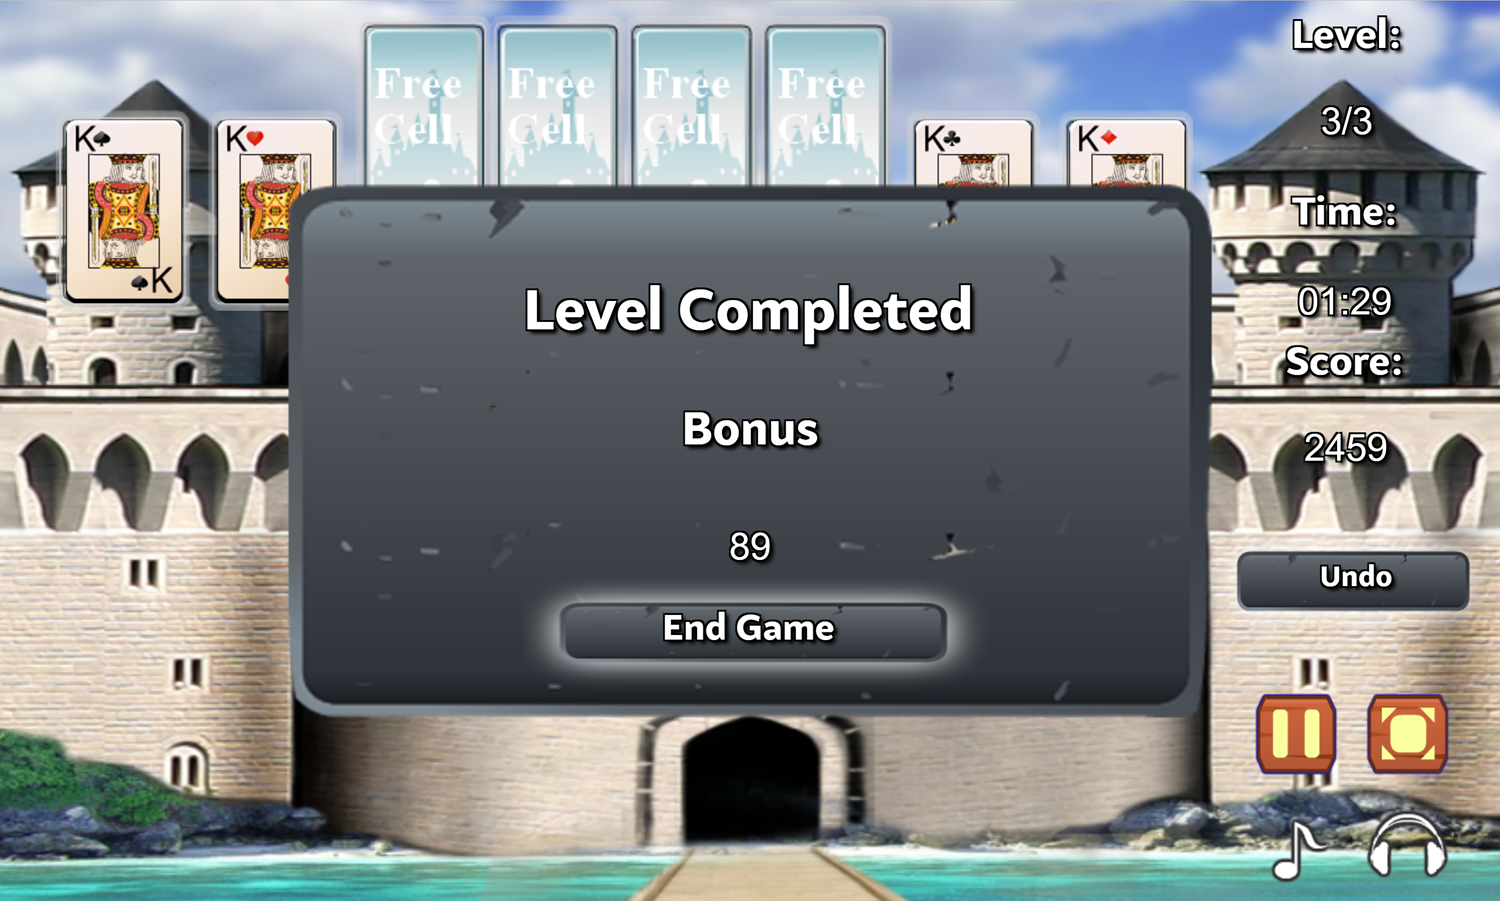 Sea Tower Solitaire Game Level Completed Screen Screenshot.